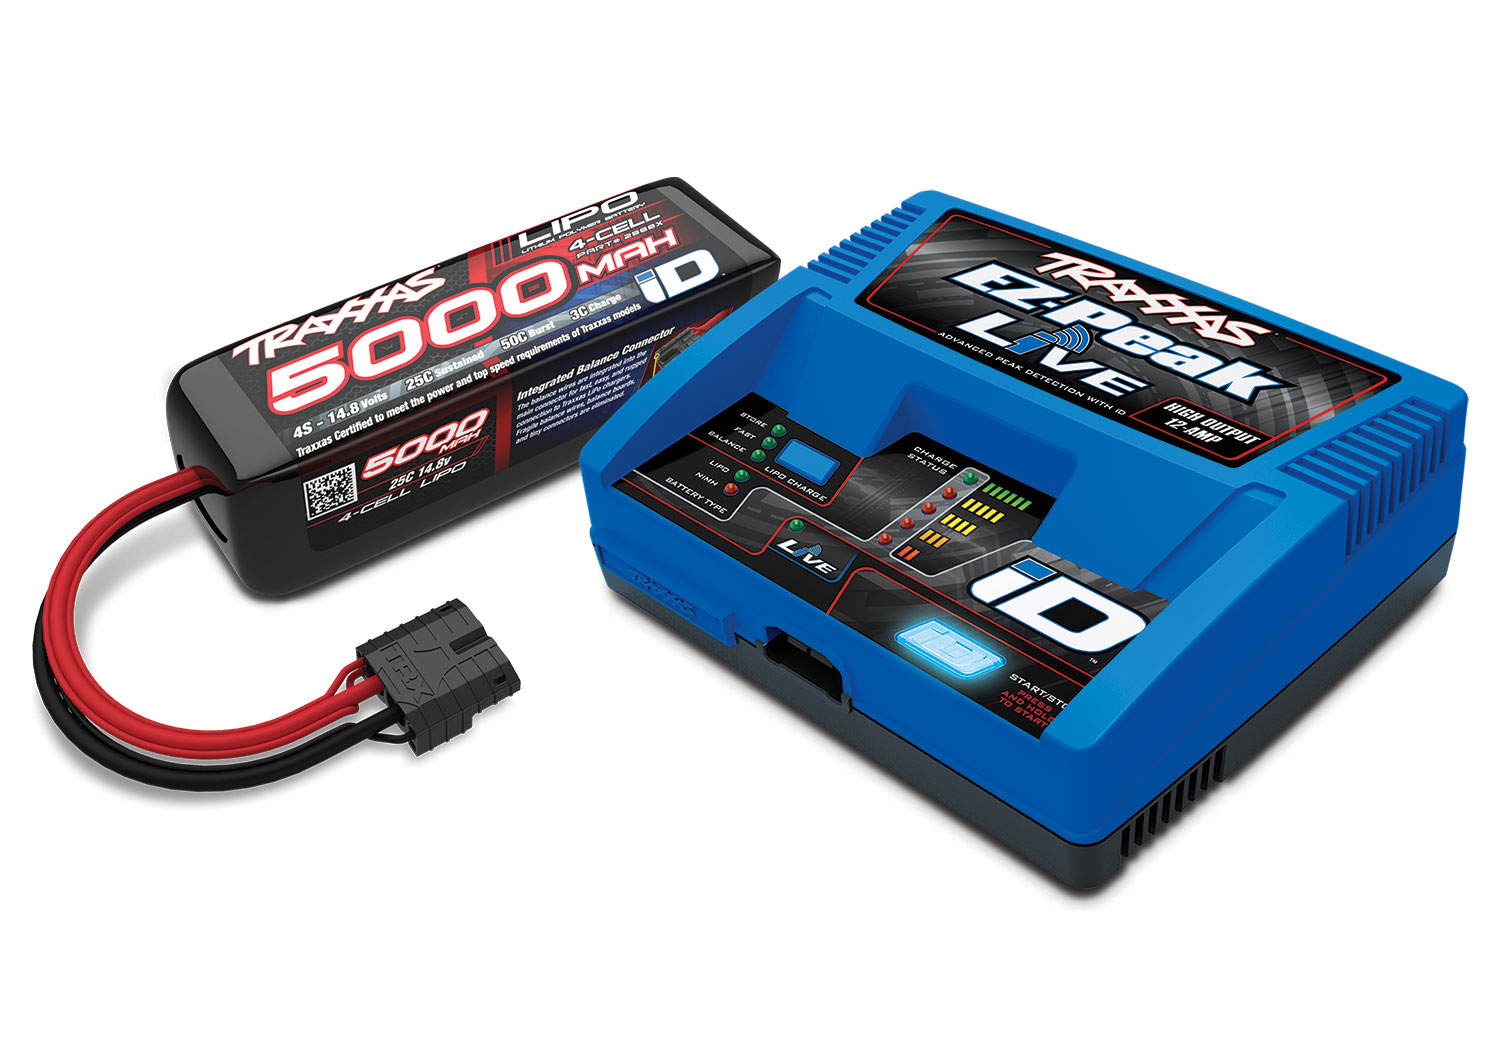 Traxxas Battery/charger completer pack (includes 2971 iD charger (1), 2888X 5000mAh 14.8V 4-cell 25C LiPo battery (1)) - TRX2996